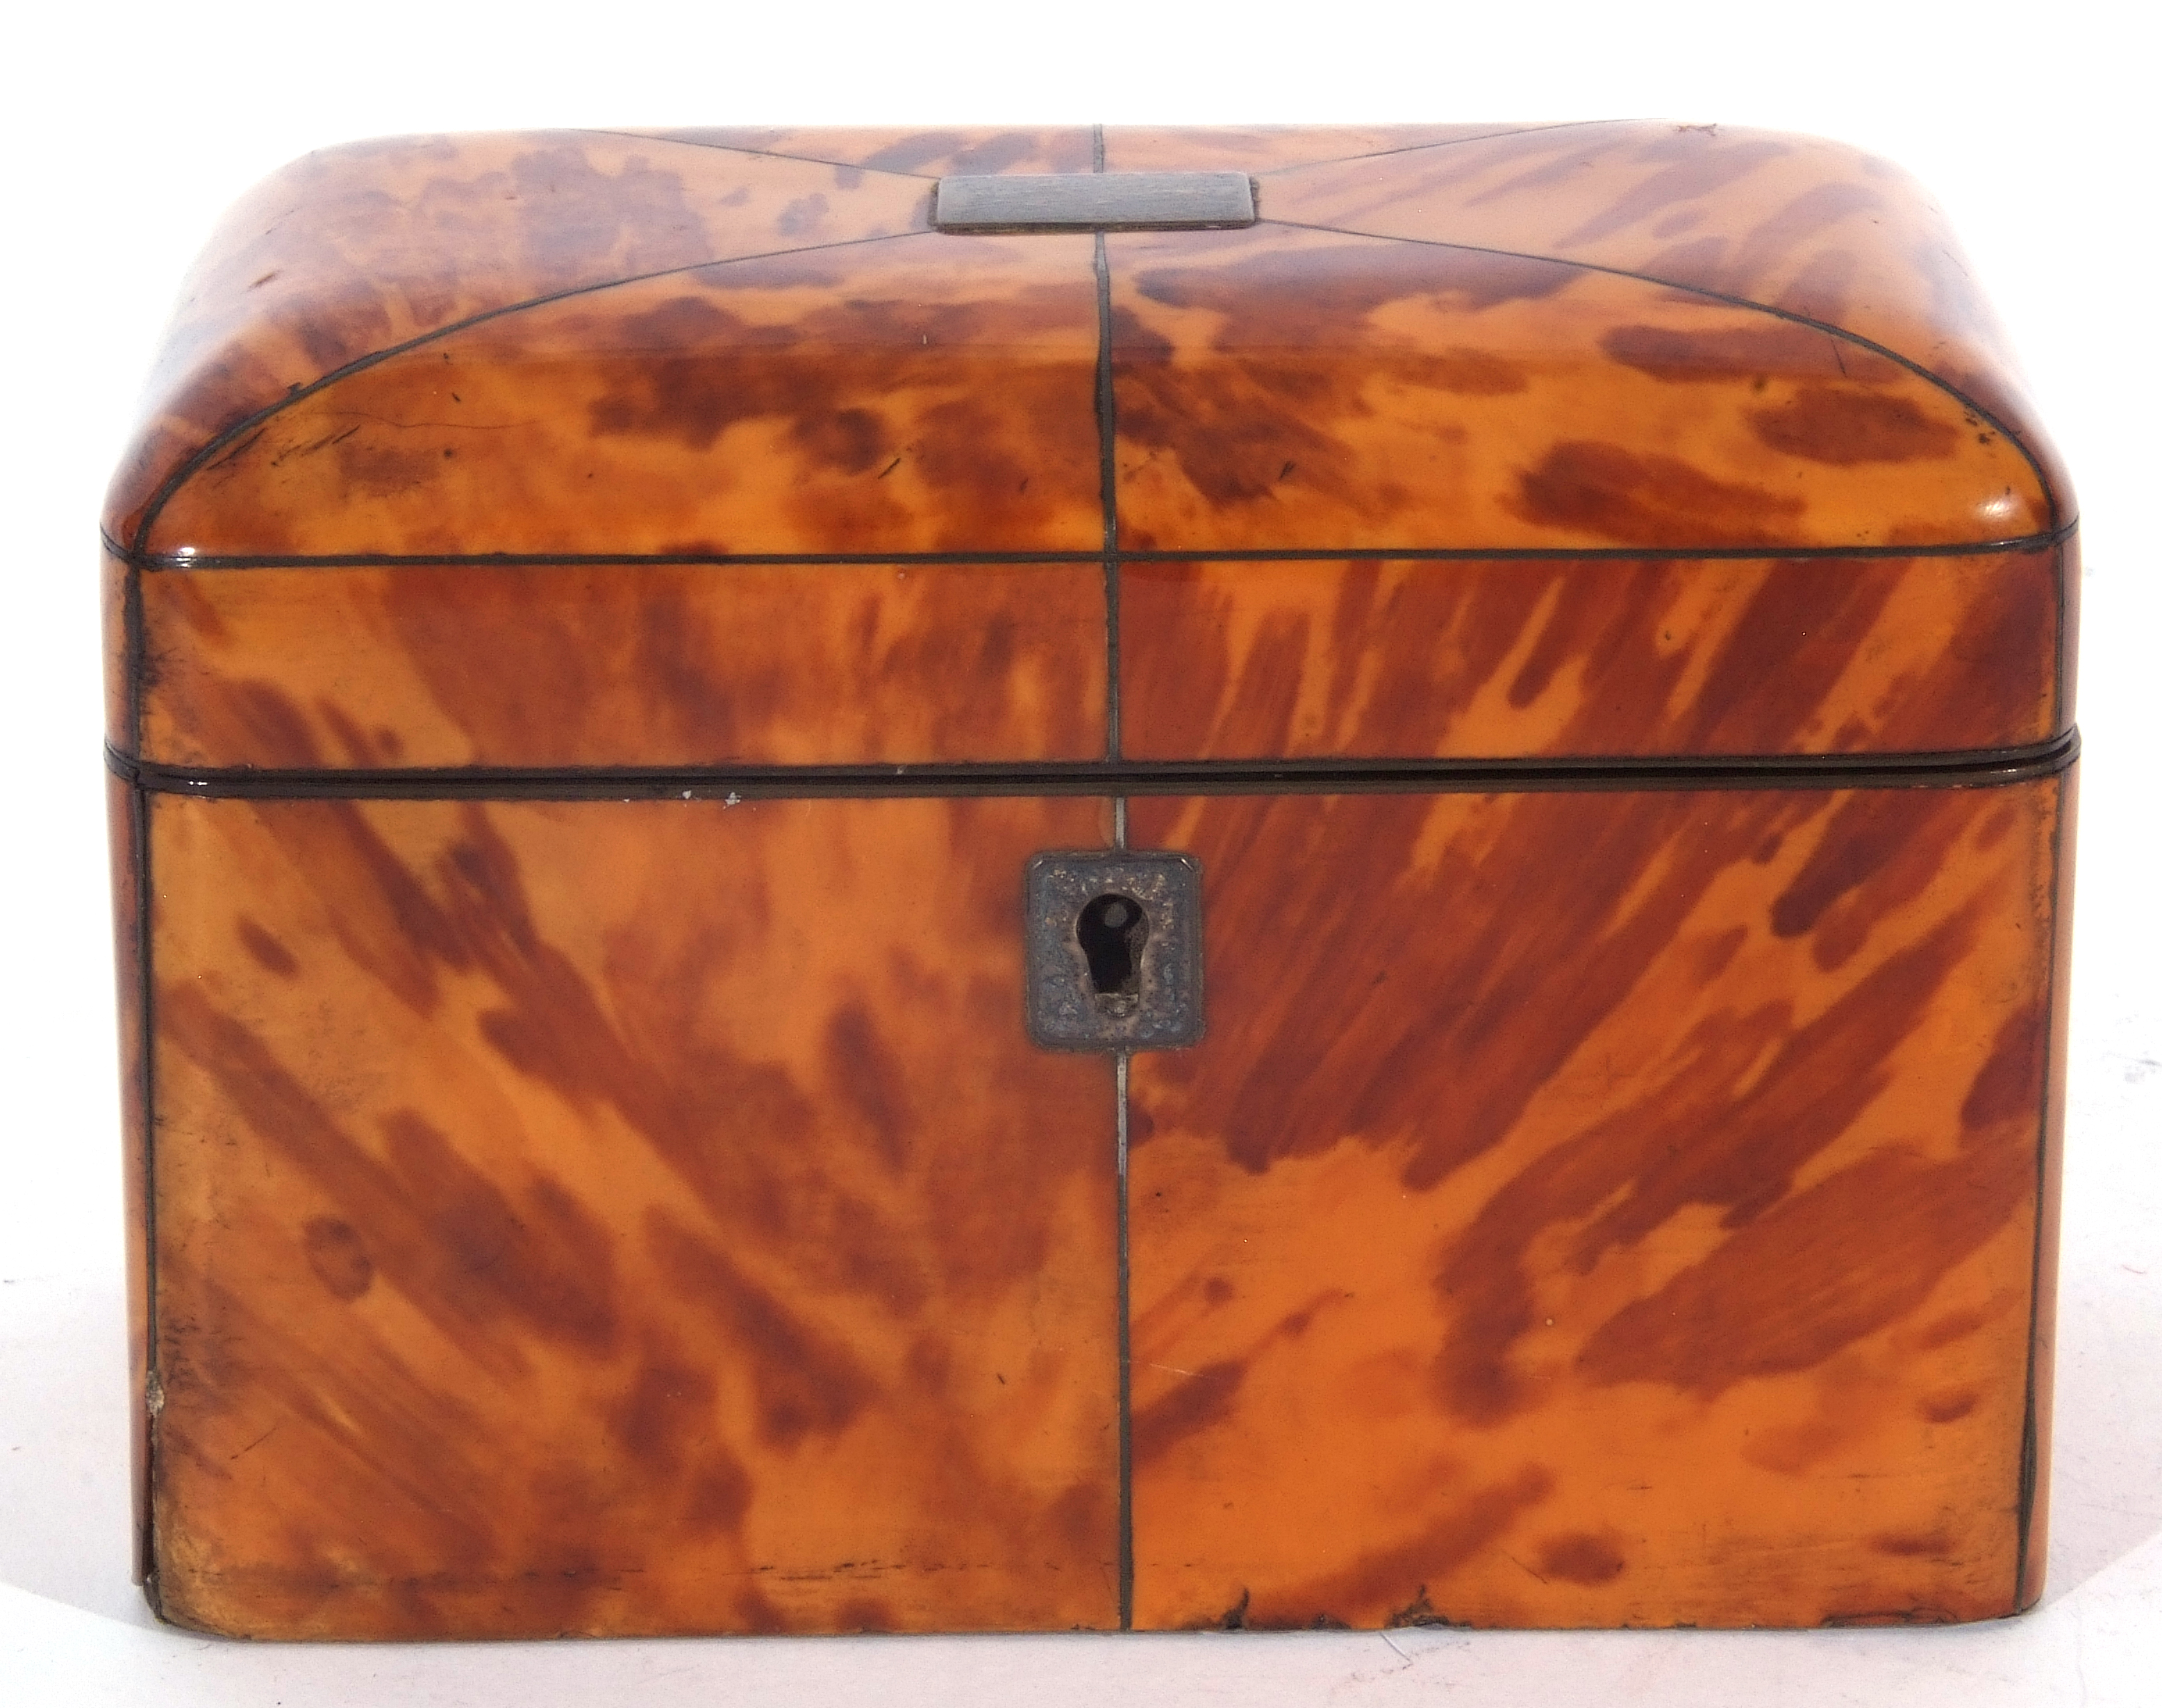 Mid-19th century tortoiseshell veneered tea caddy with pewter divisional inlays, the lid opening - Image 7 of 11